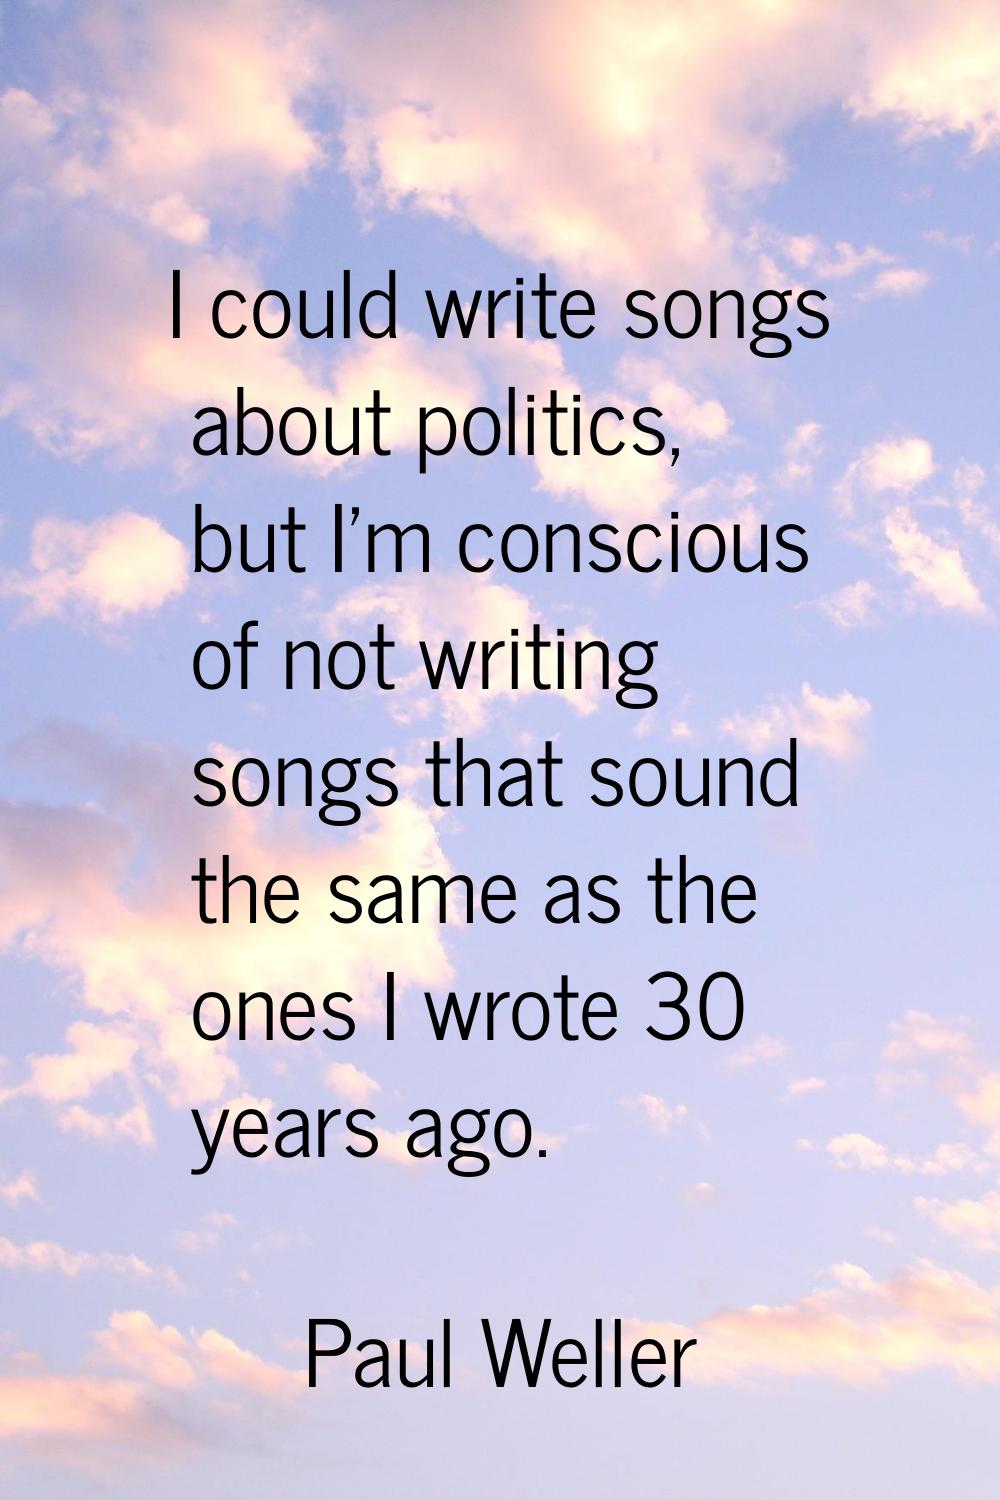 I could write songs about politics, but I'm conscious of not writing songs that sound the same as t